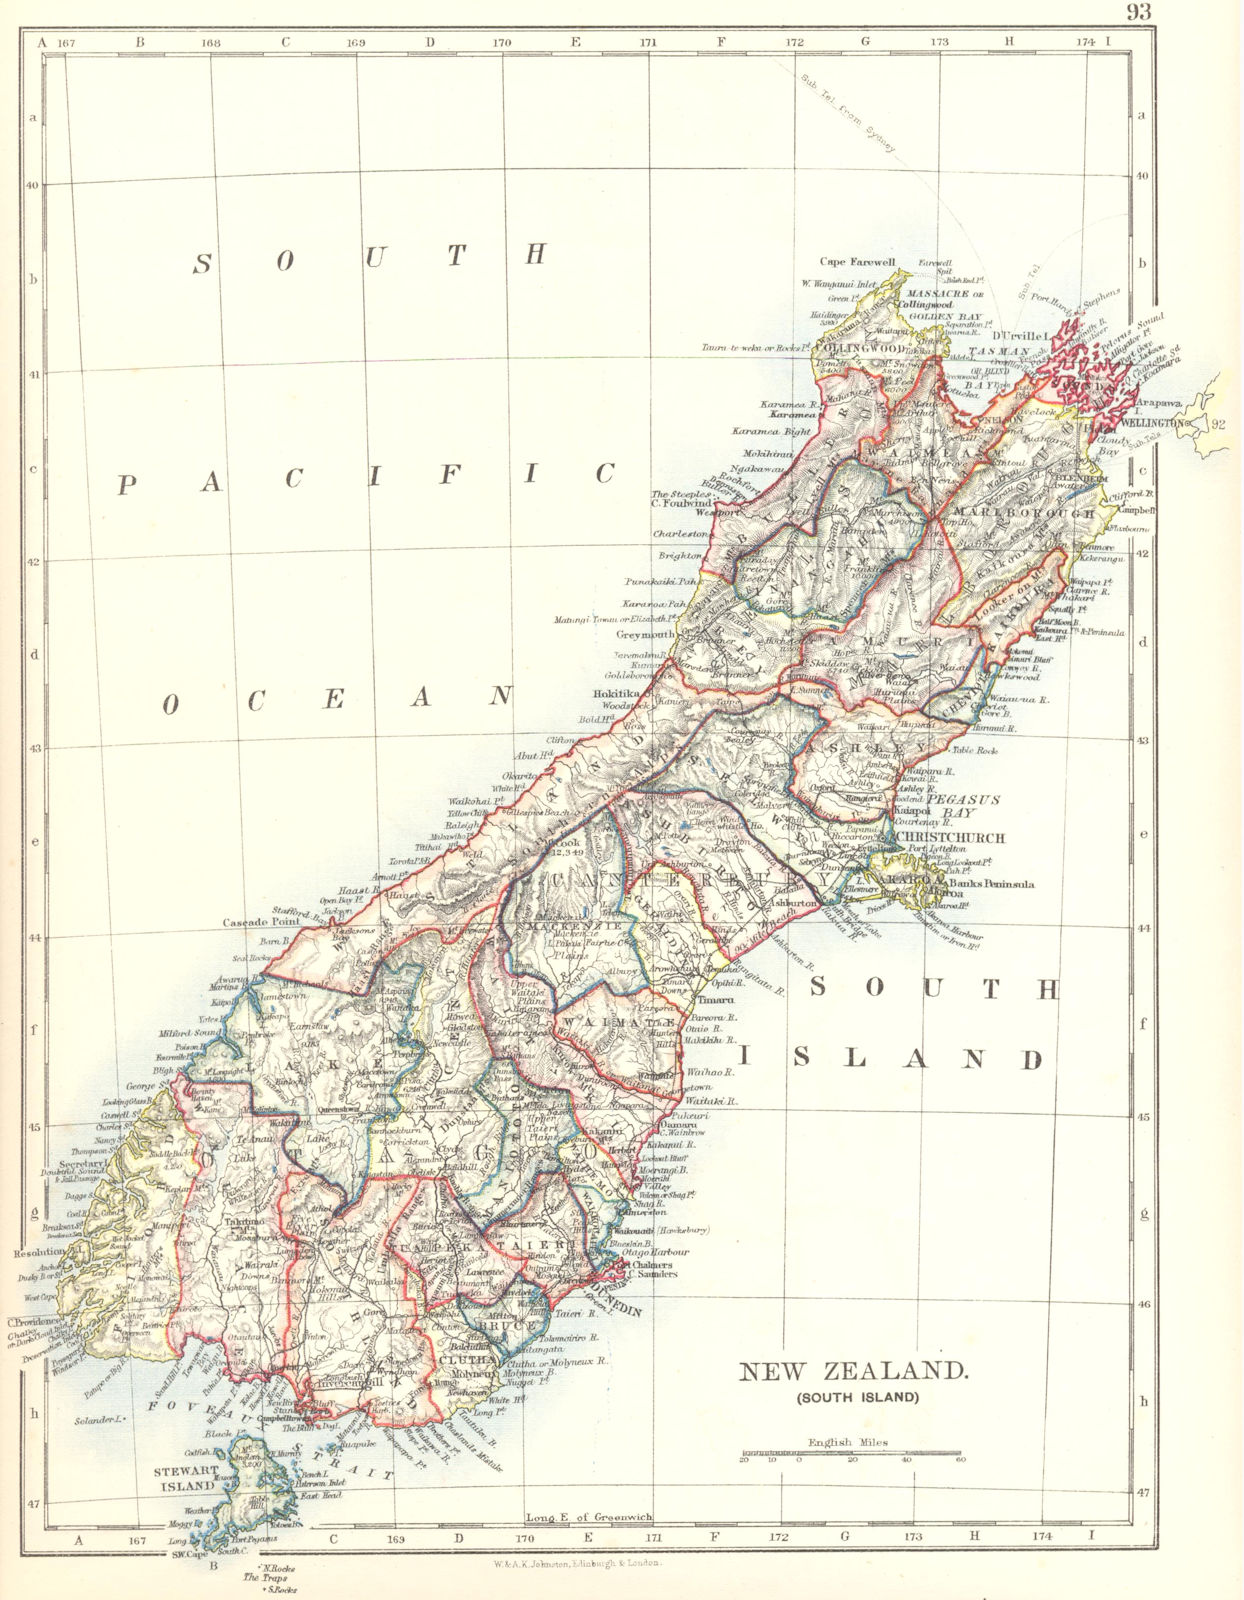 SOUTH ISLAND NEW ZEALAND. Showing counties. Telegraph cables. JOHNSTON 1899 map